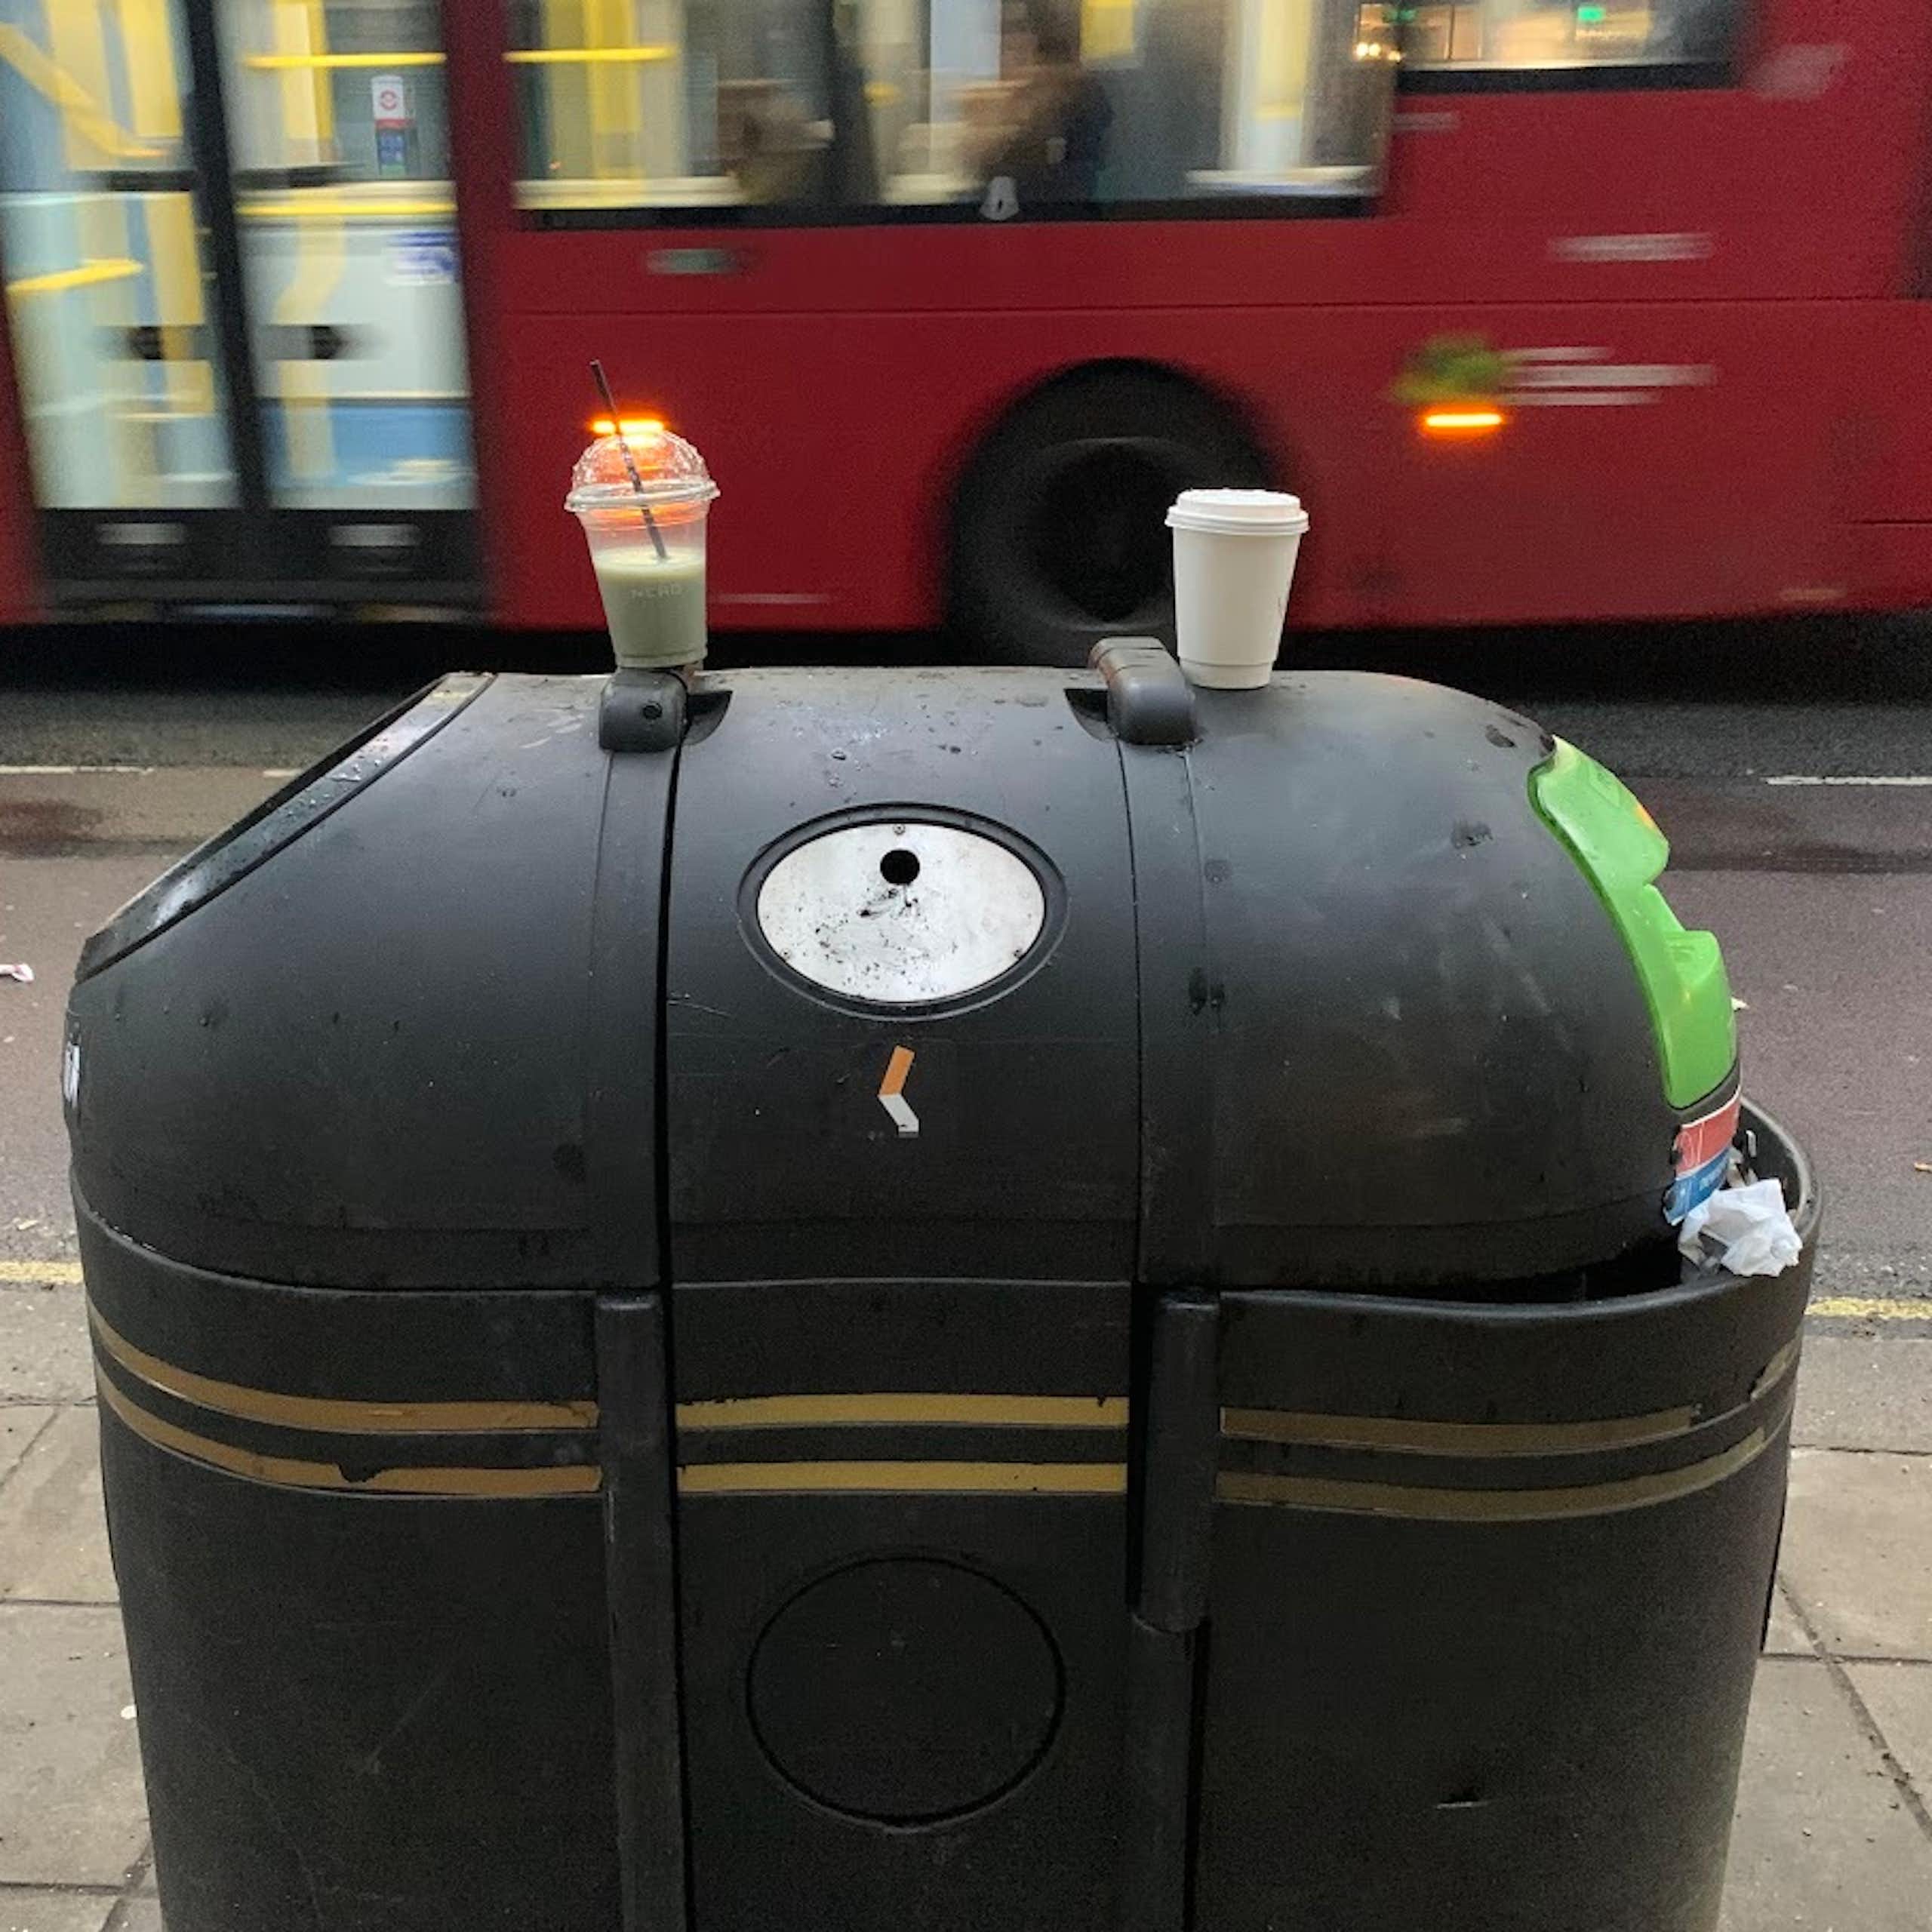 London street, big black bin in foreground, two white plastic cups sitting littered on top, blurry red bus in background